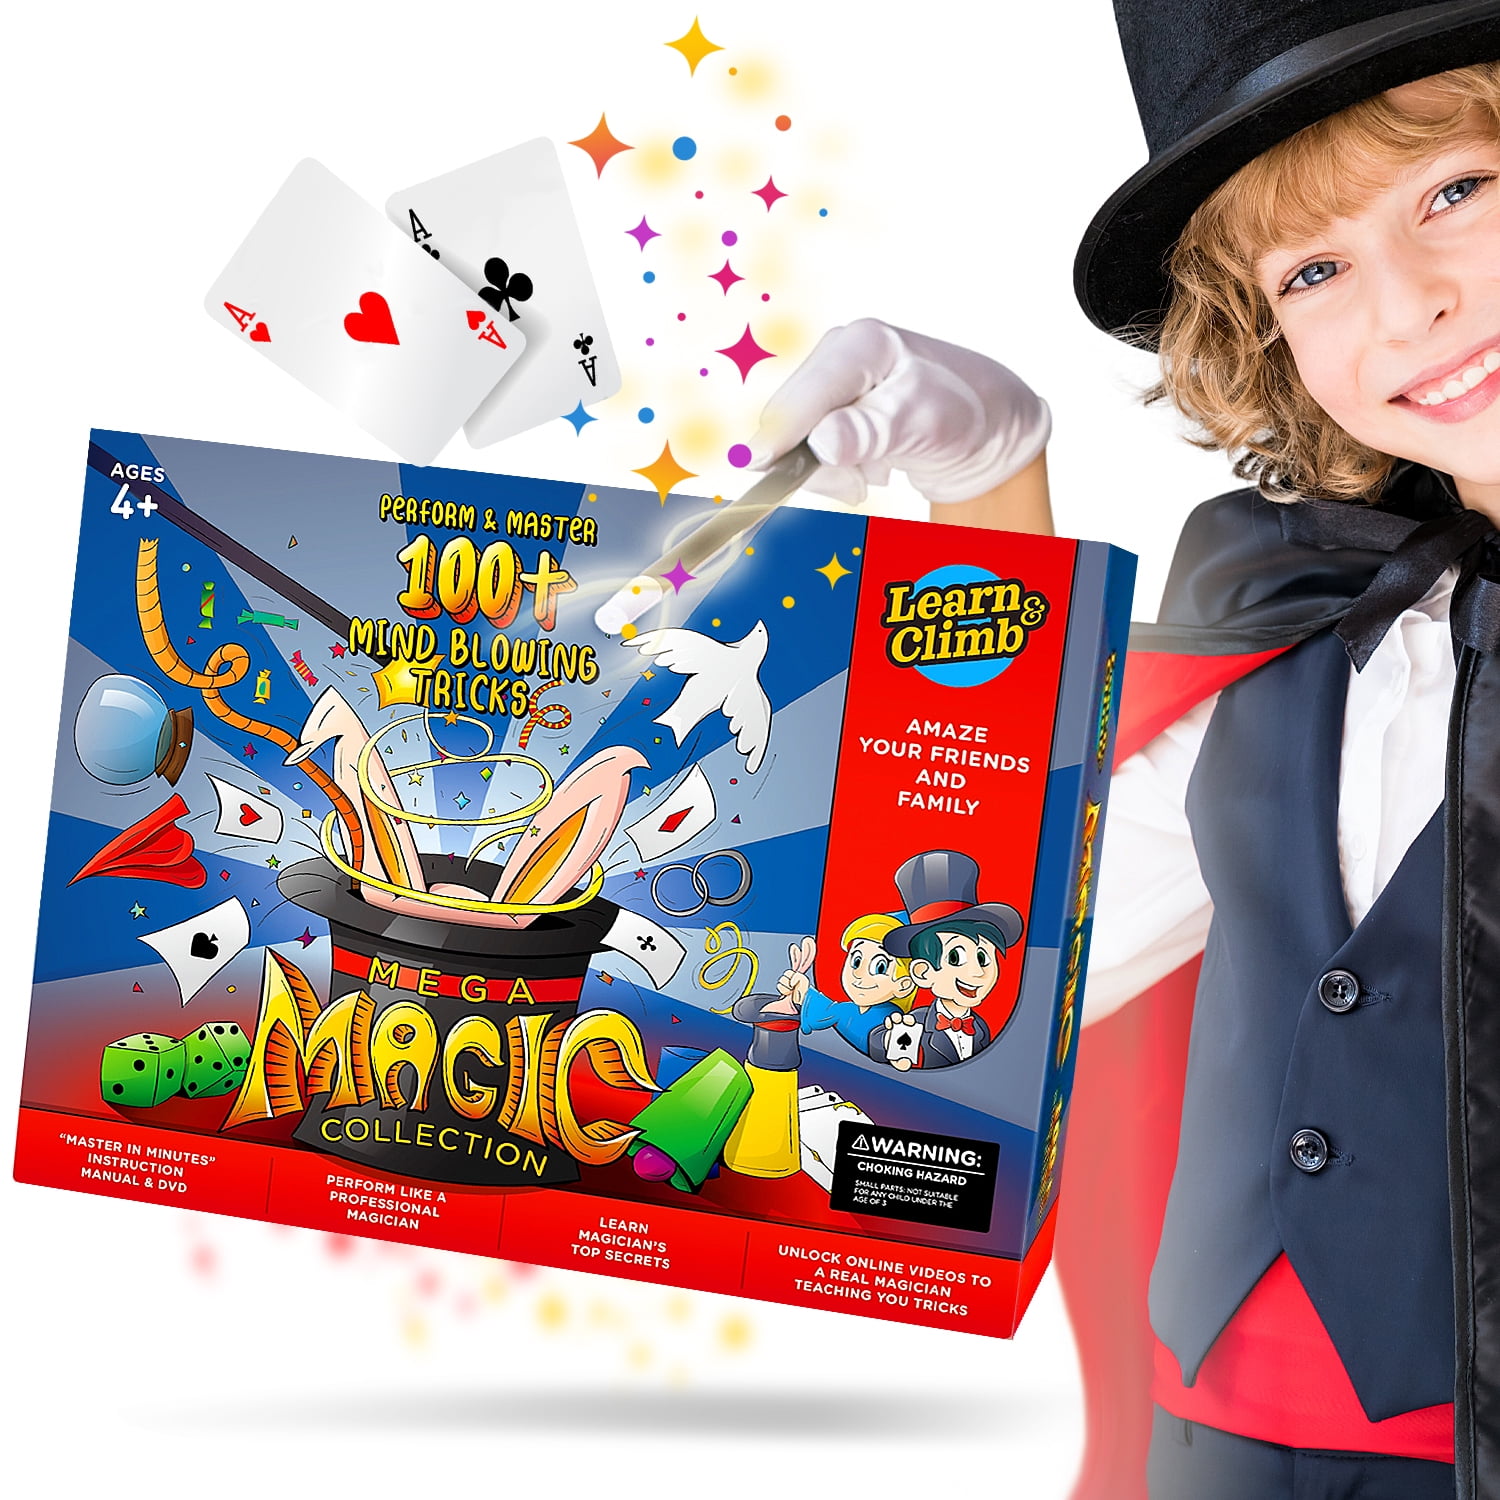 MasterMagic Magic Kit Ideal For Beginners and Kids of All Ages! Easy Magic Tricks For Children Learn Over 350 Spectacular Tricks With This Magic Set